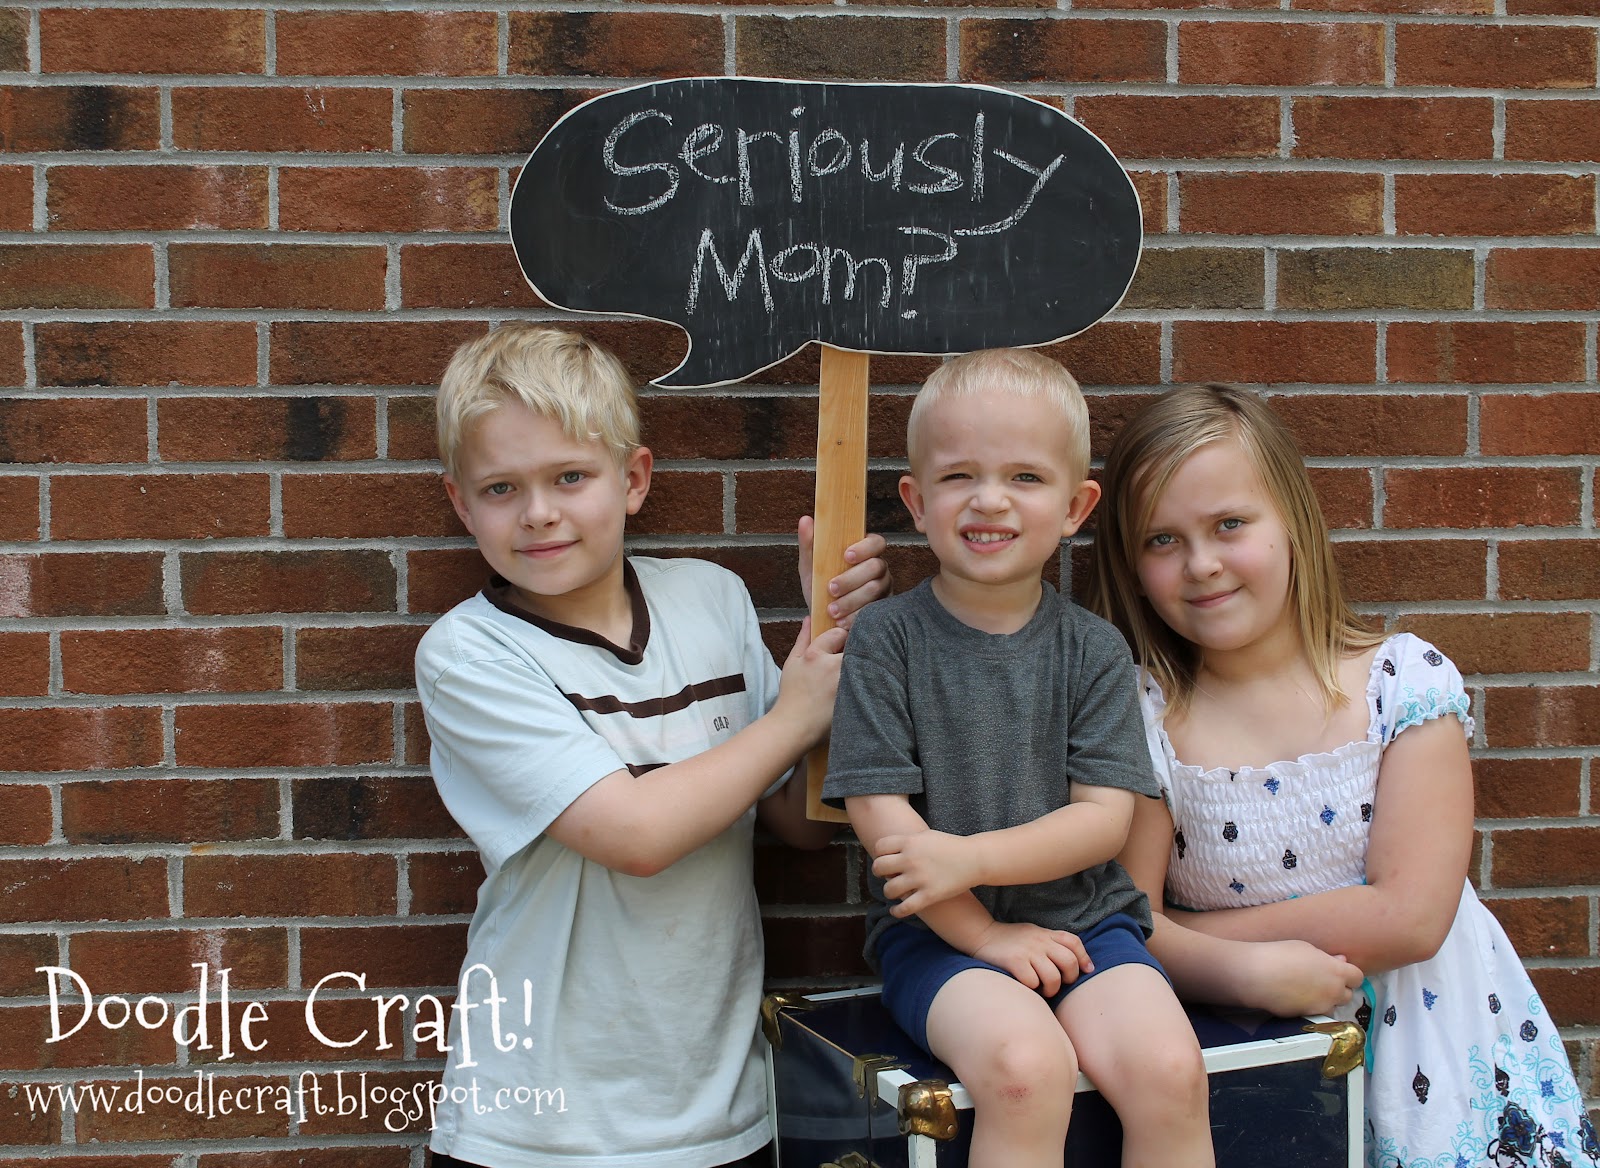 Upcycled Wood Thought-Bubble Chalkboard Photo-Prop Sign!